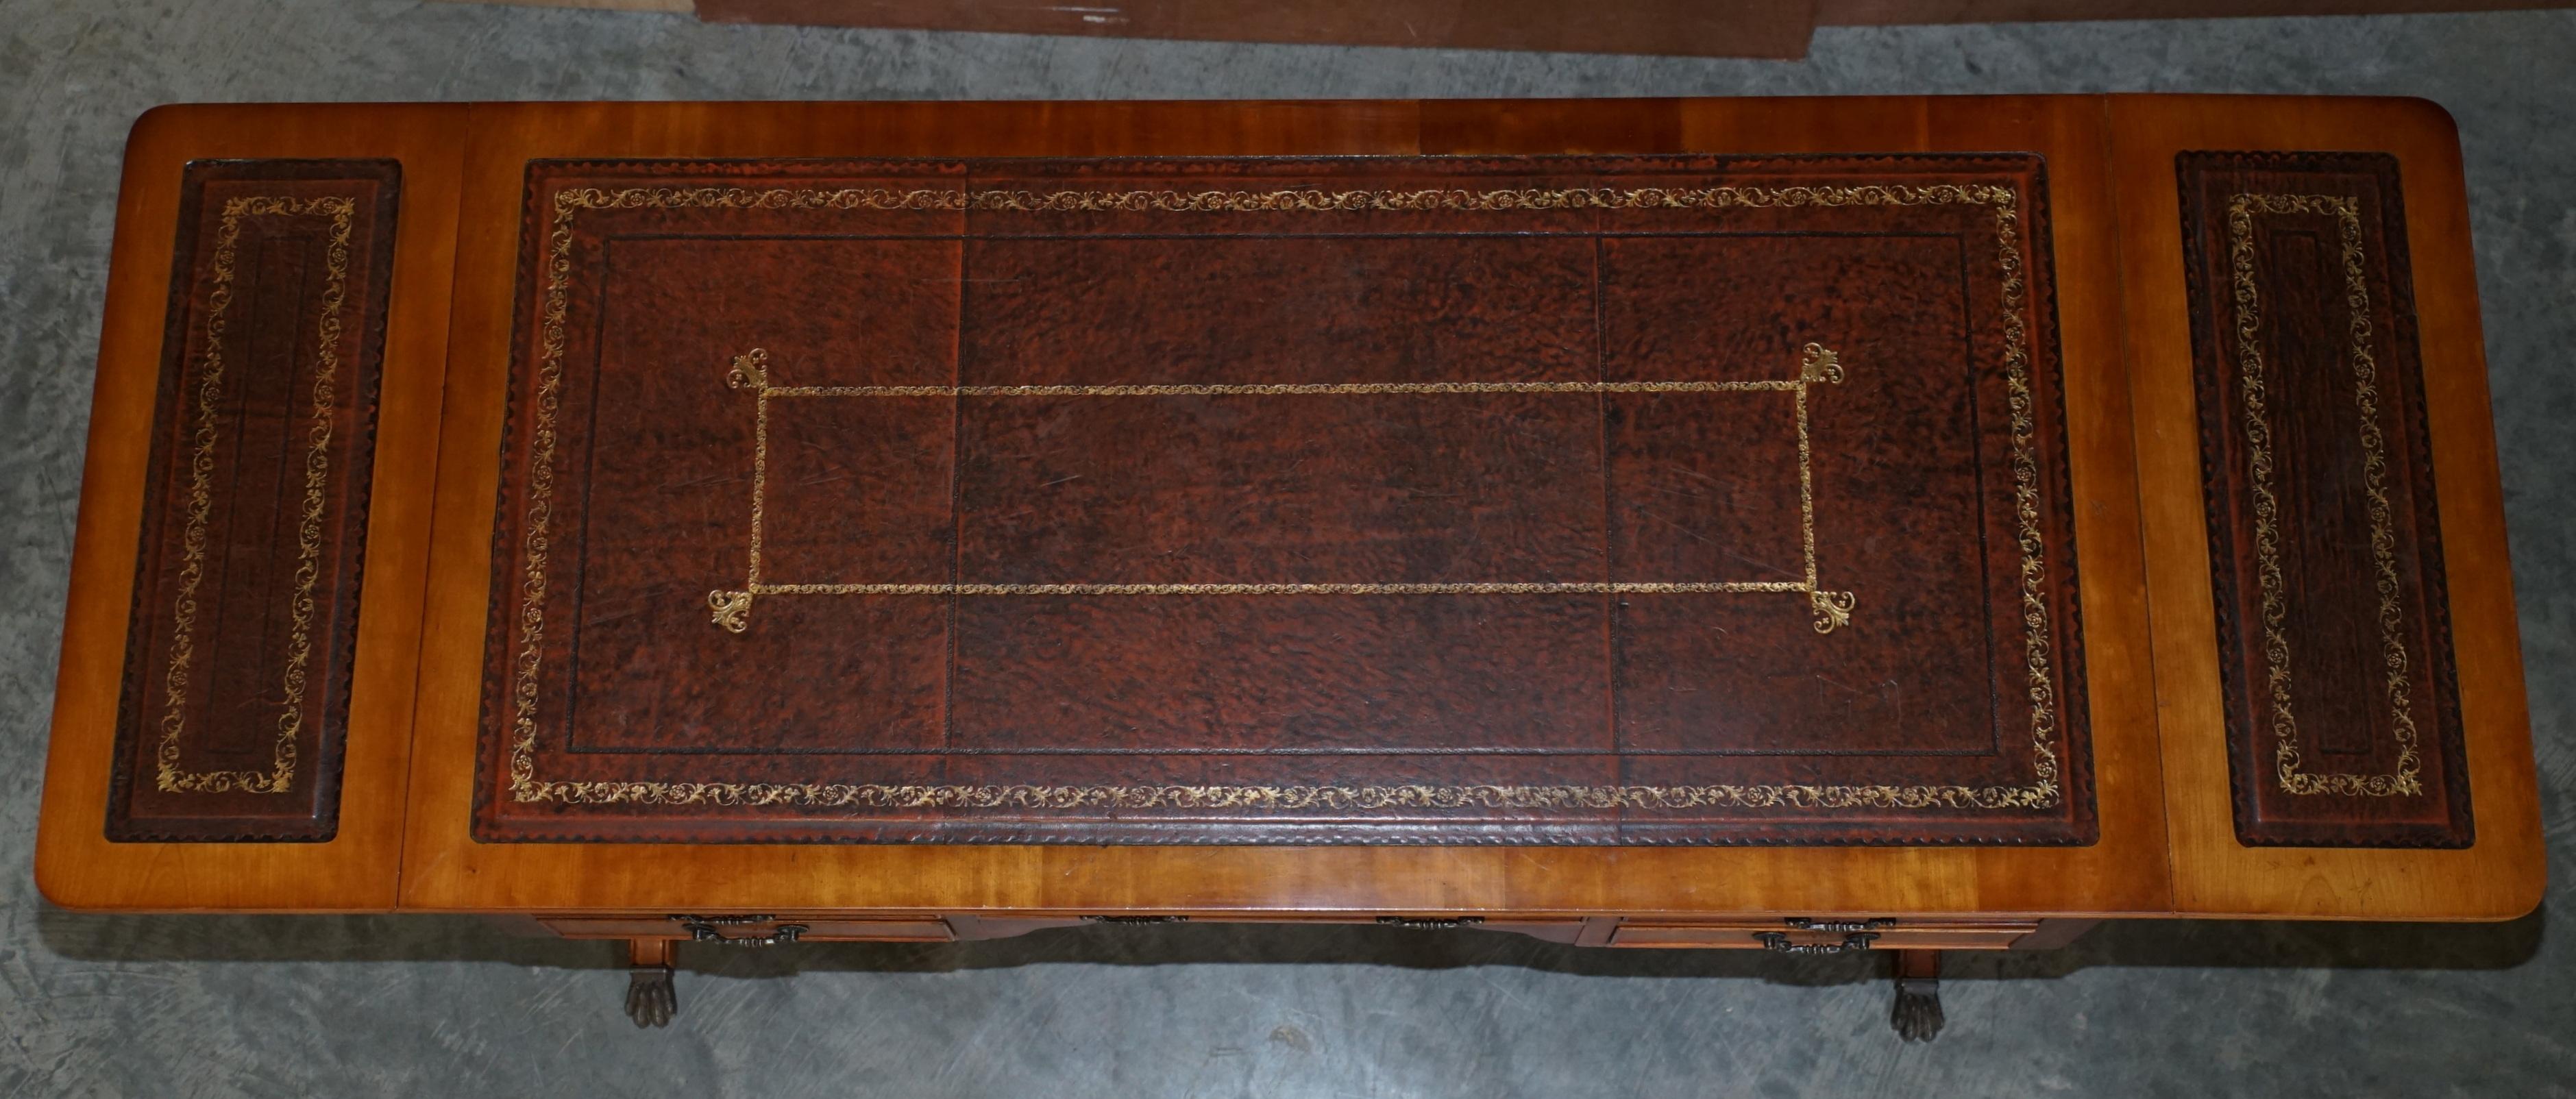 Extending Writing Table Desk, Burr Yew Wood Brown Leather Gold Leaf Embossed Top For Sale 8